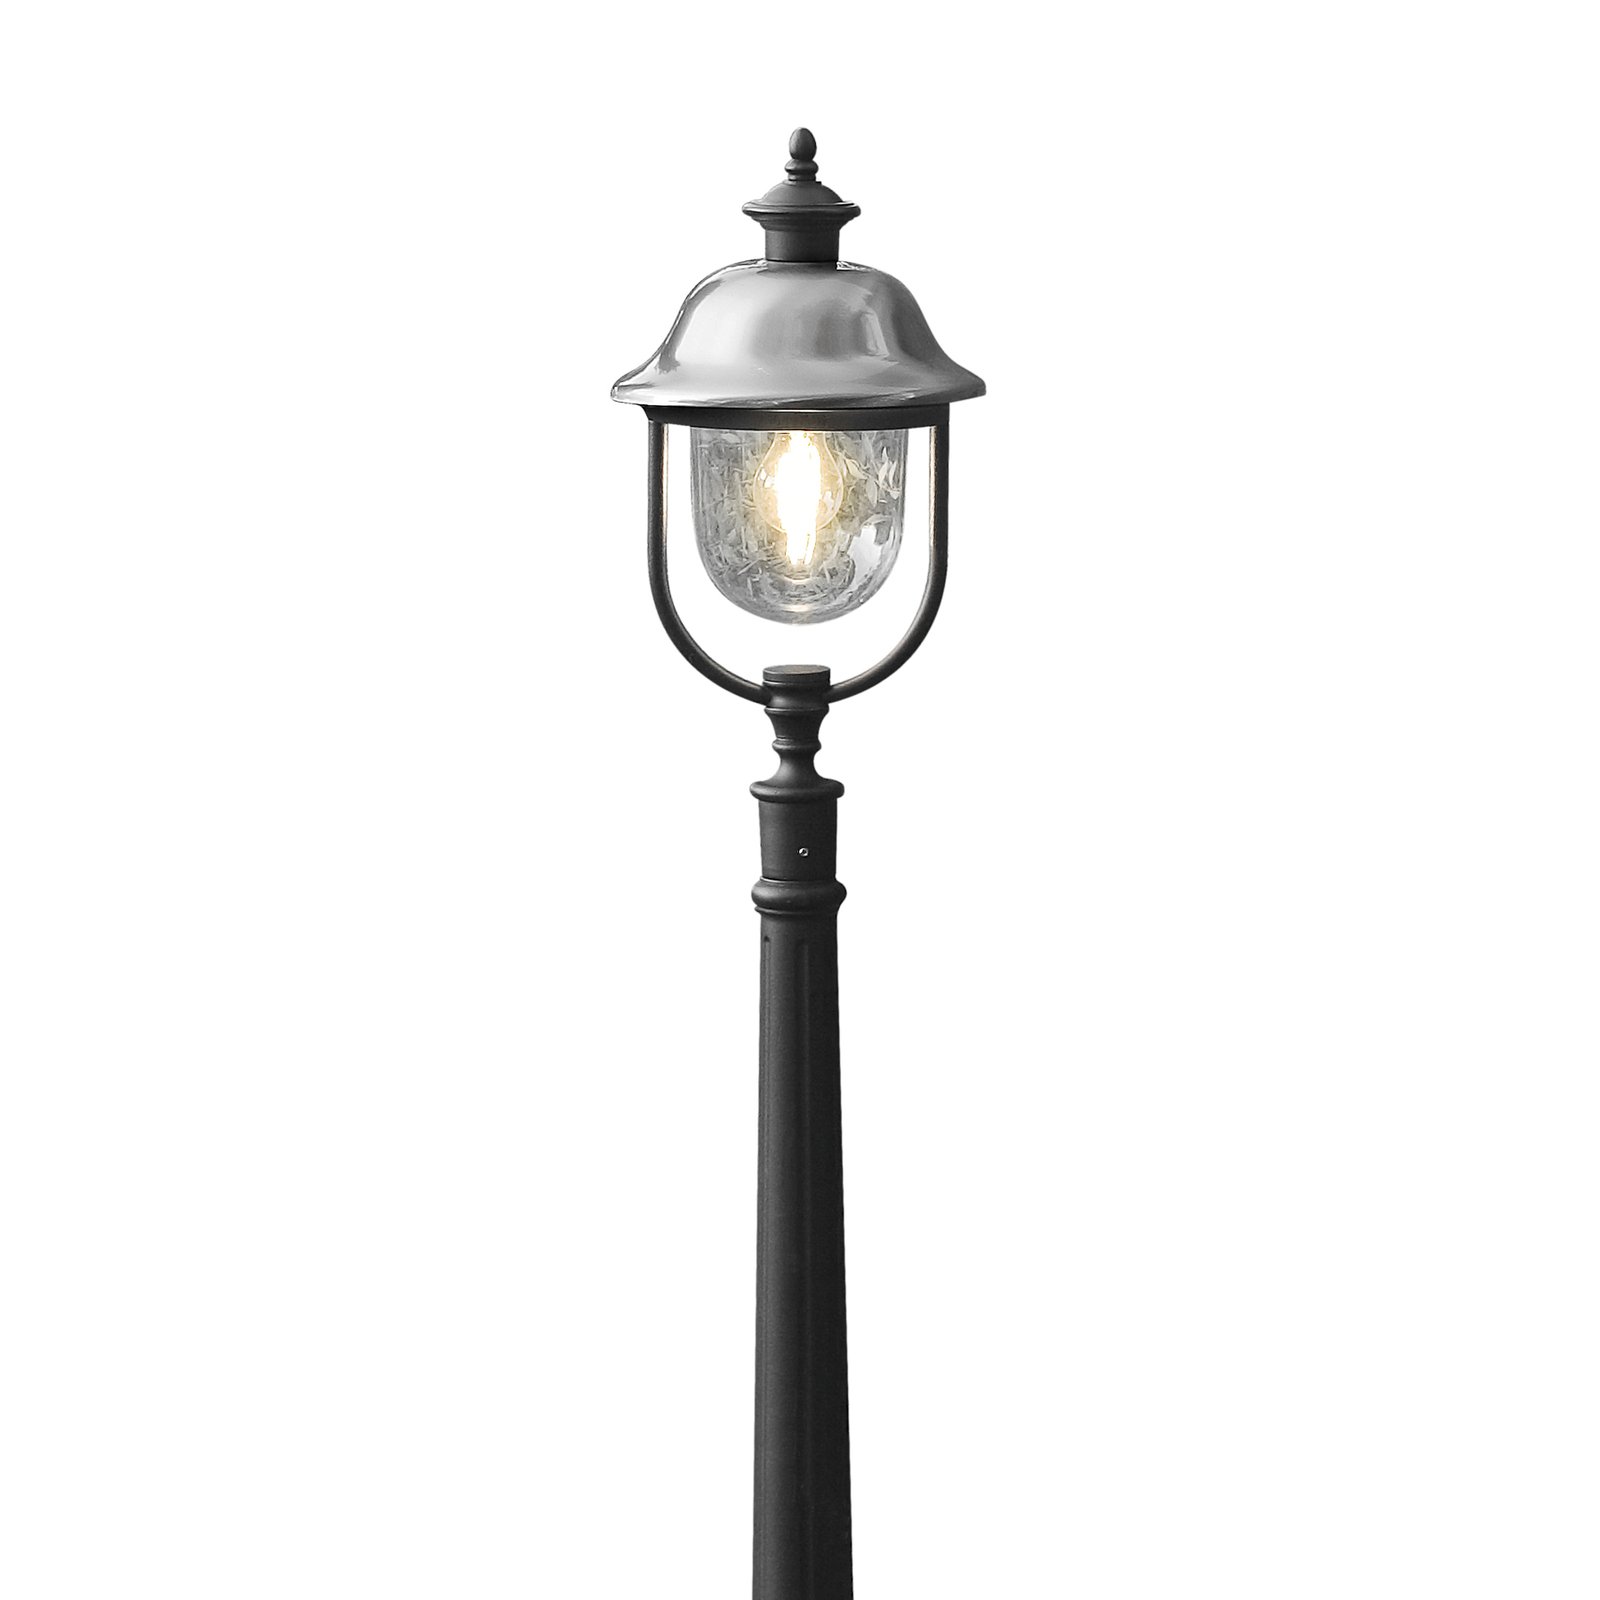 Parma path light with a stainless steel roof